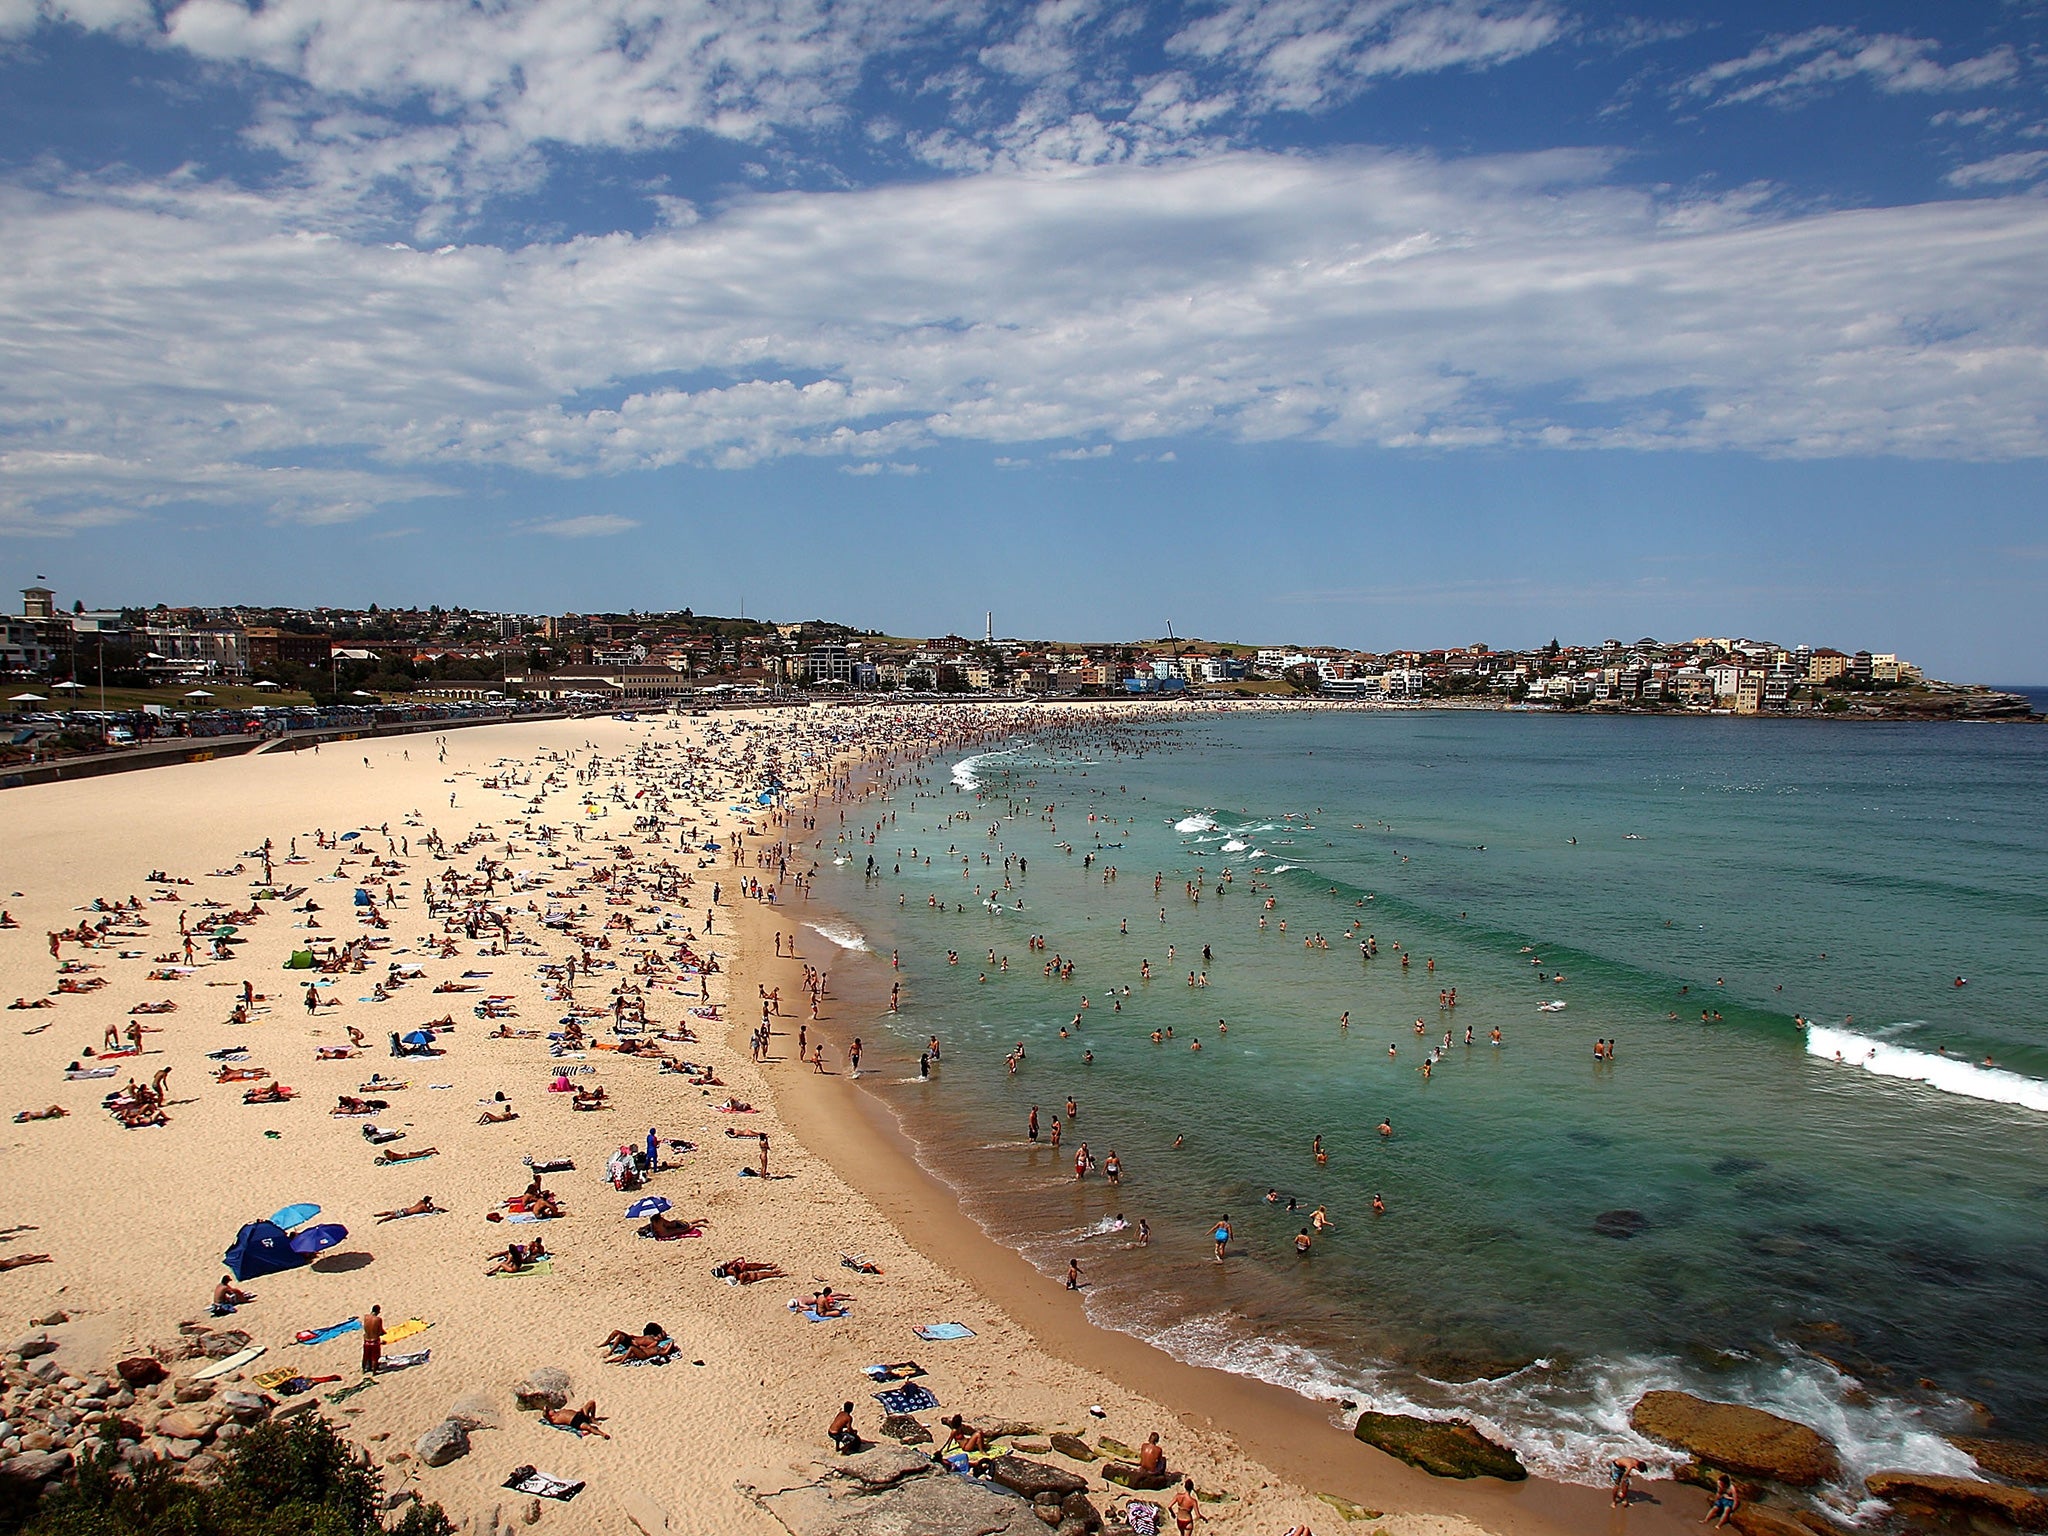 The flights would allow British tourists to spend even more time on Bondi Beach